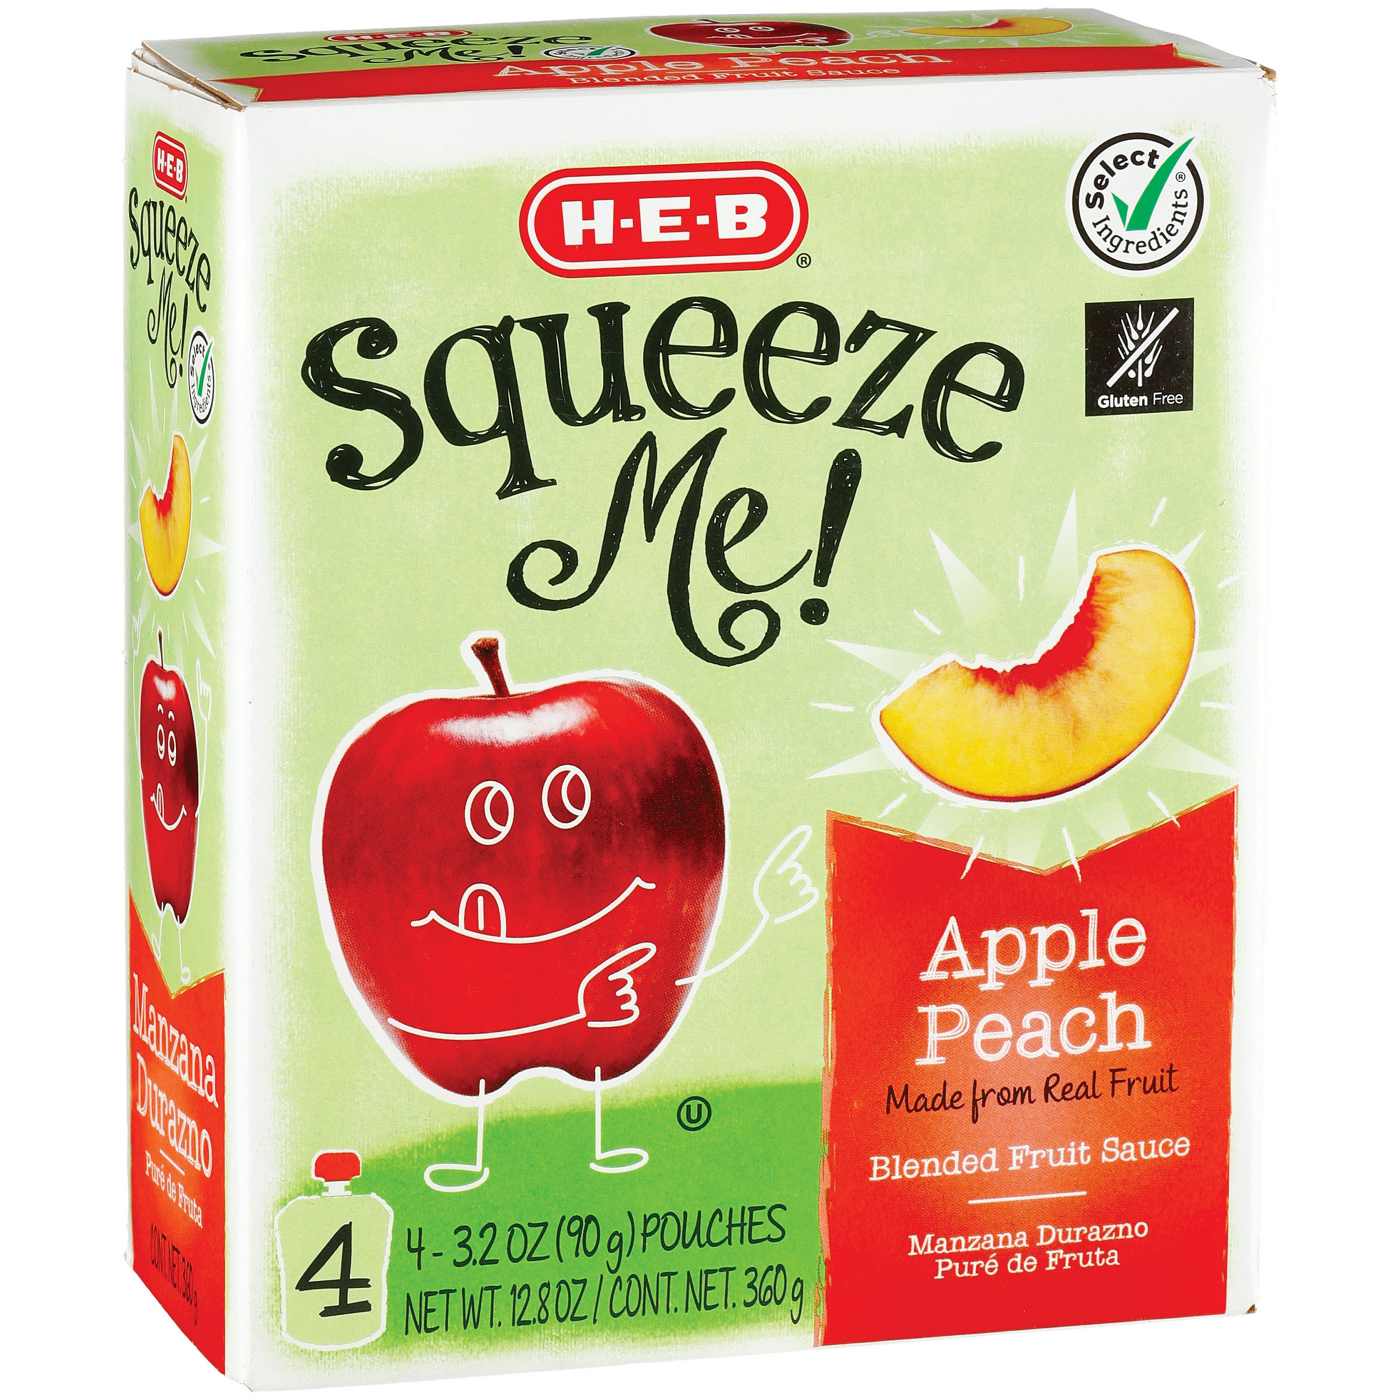 H-E-B Squeeze Me! Peach Applesauce Pouches; image 1 of 2